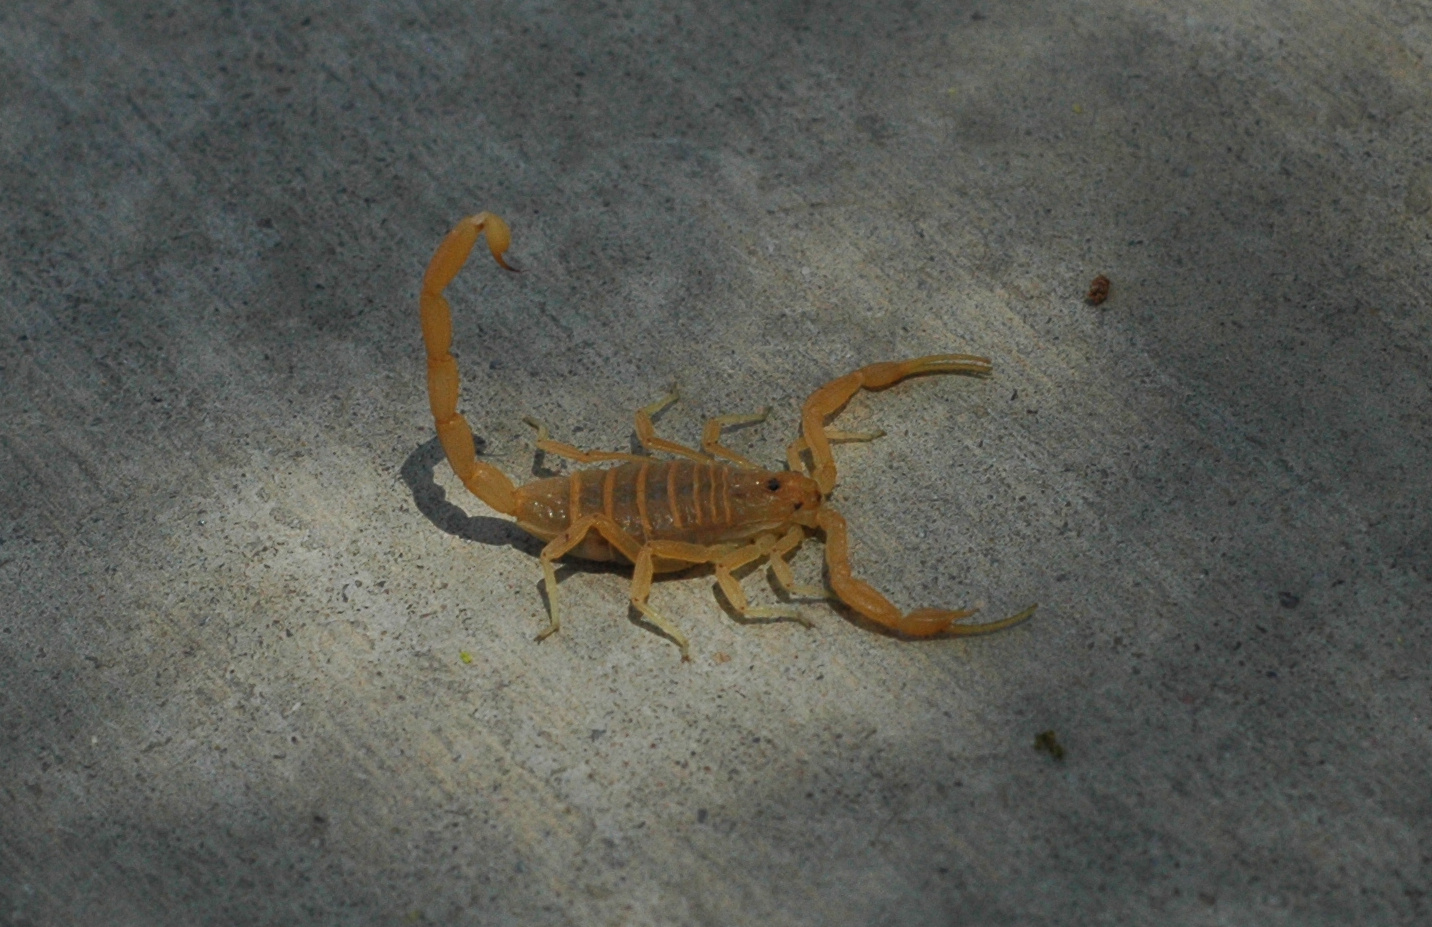 Arizona Bark Scorpions Arena Pile Top 10 Most Dangerous And Deadliest Scorpions In The World